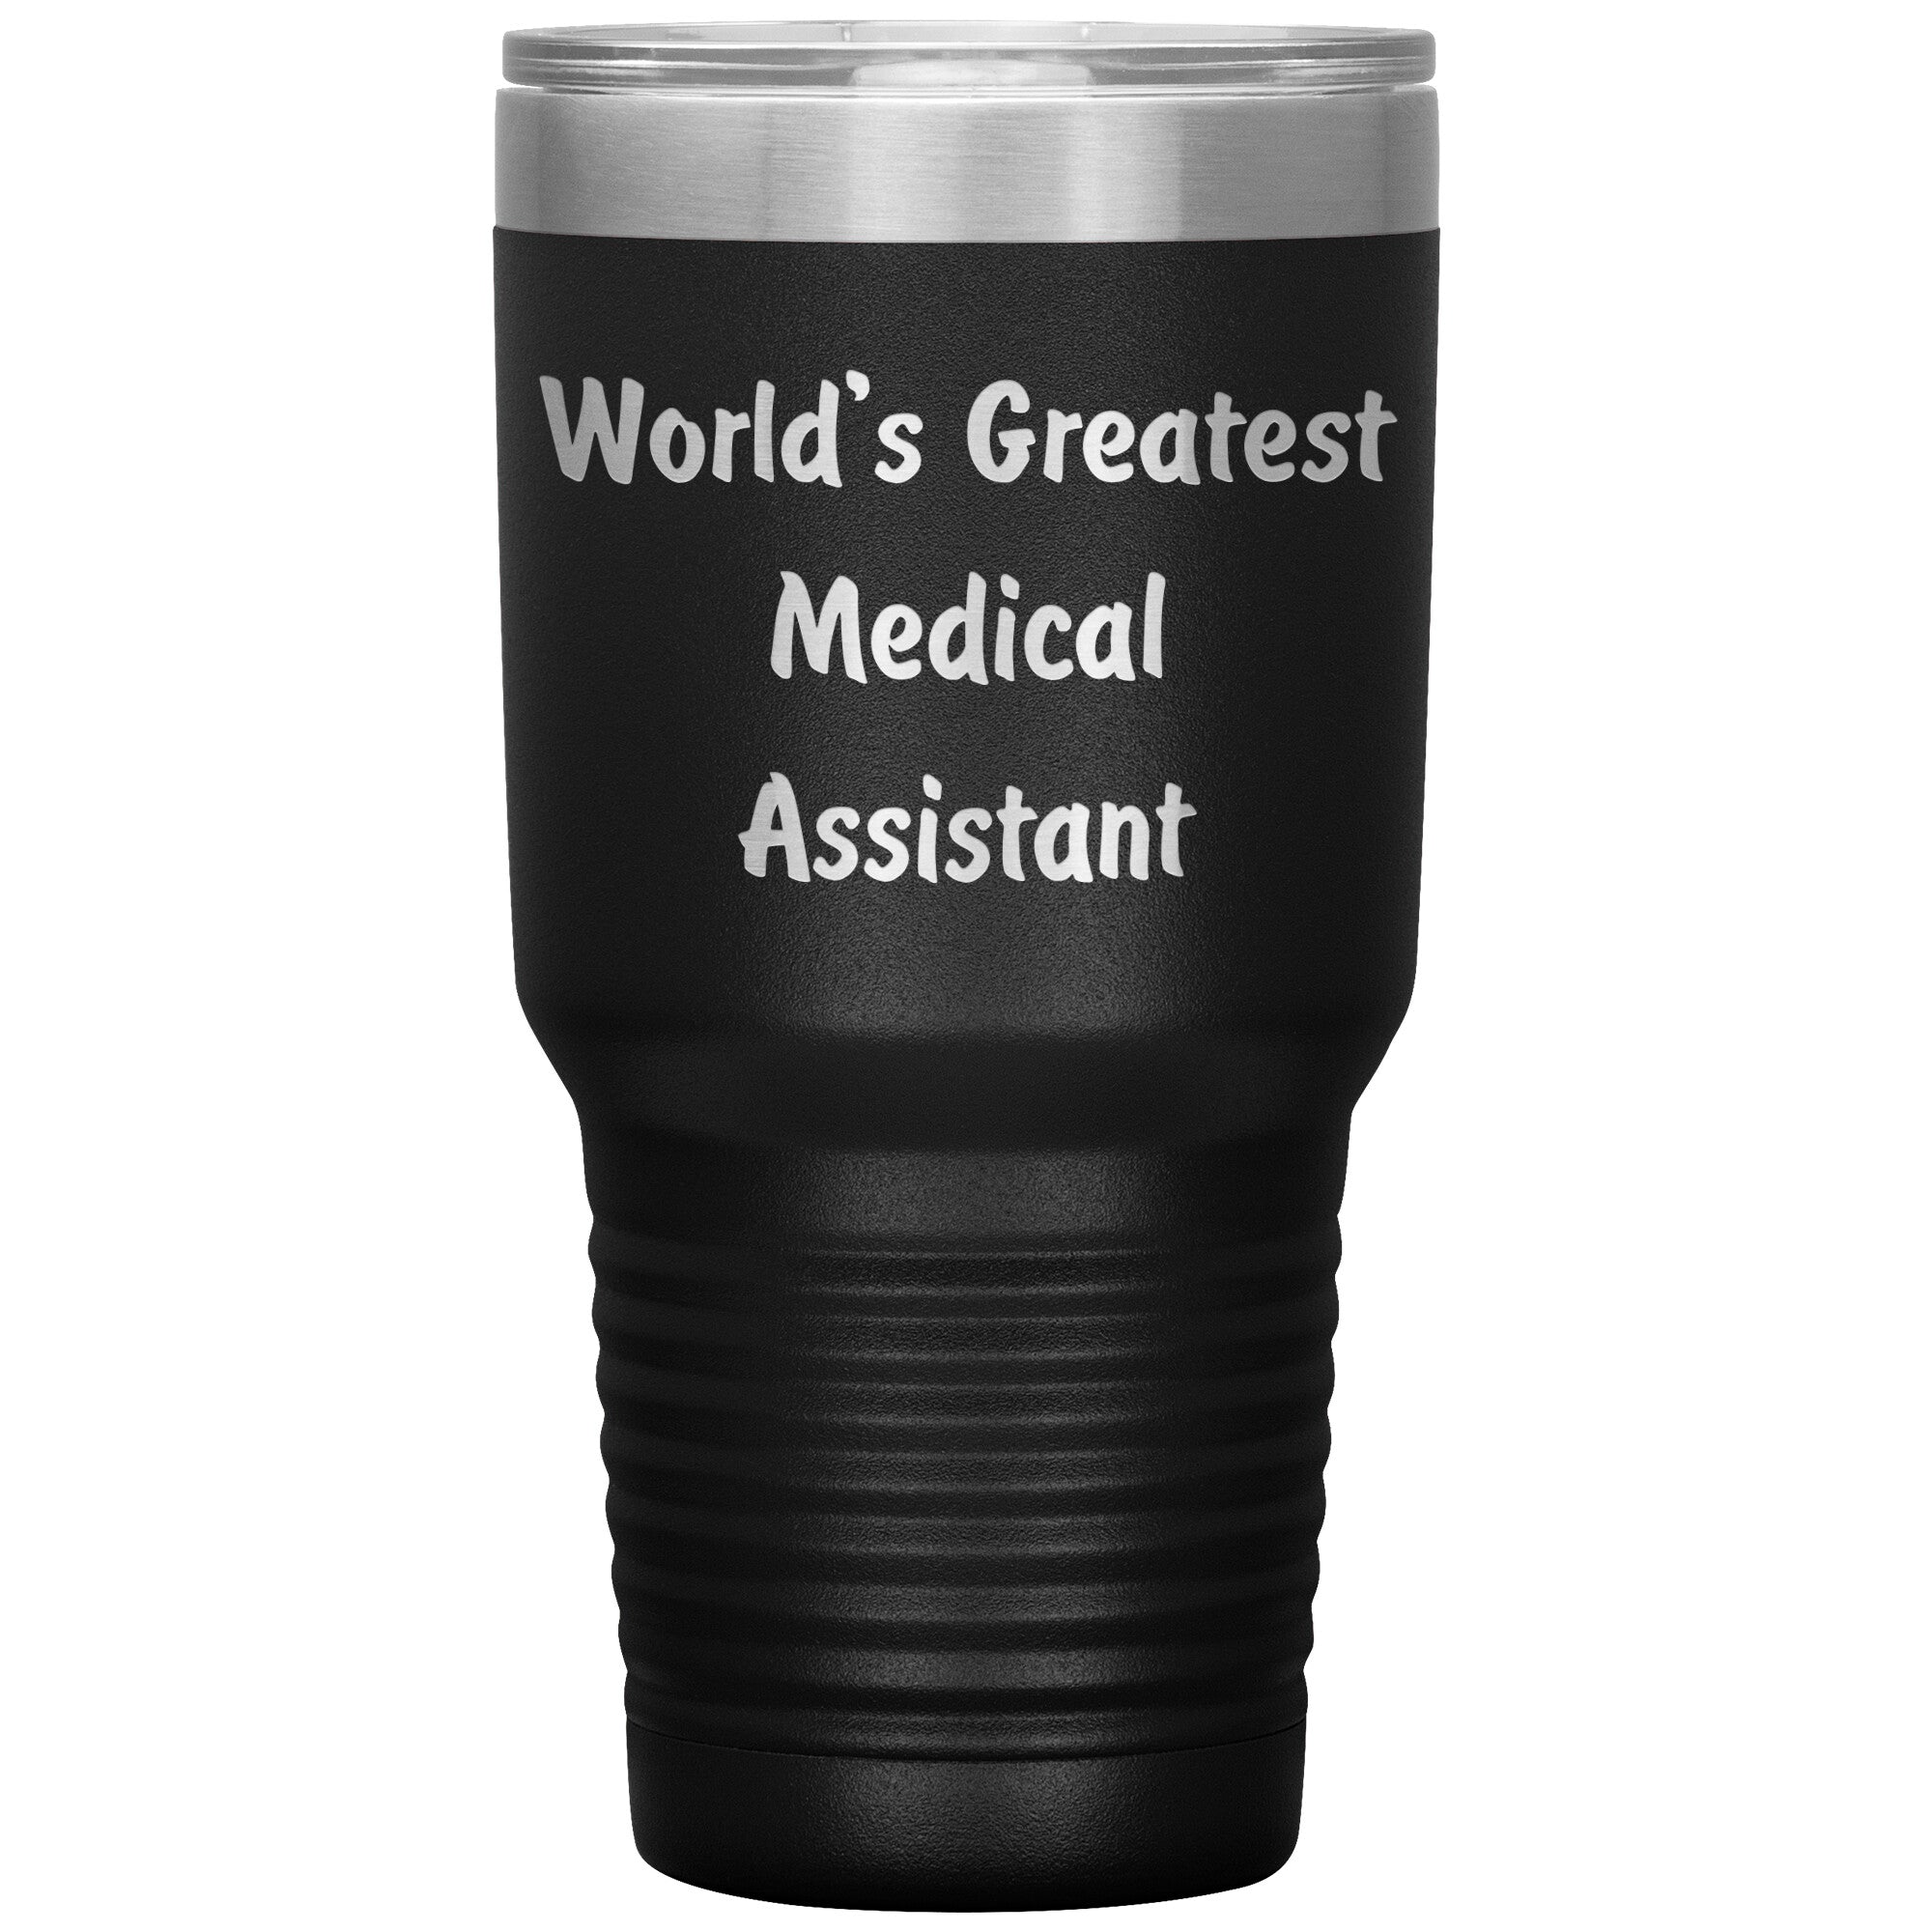 World's Greatest Medical Assistant - 30oz Insulated Tumbler